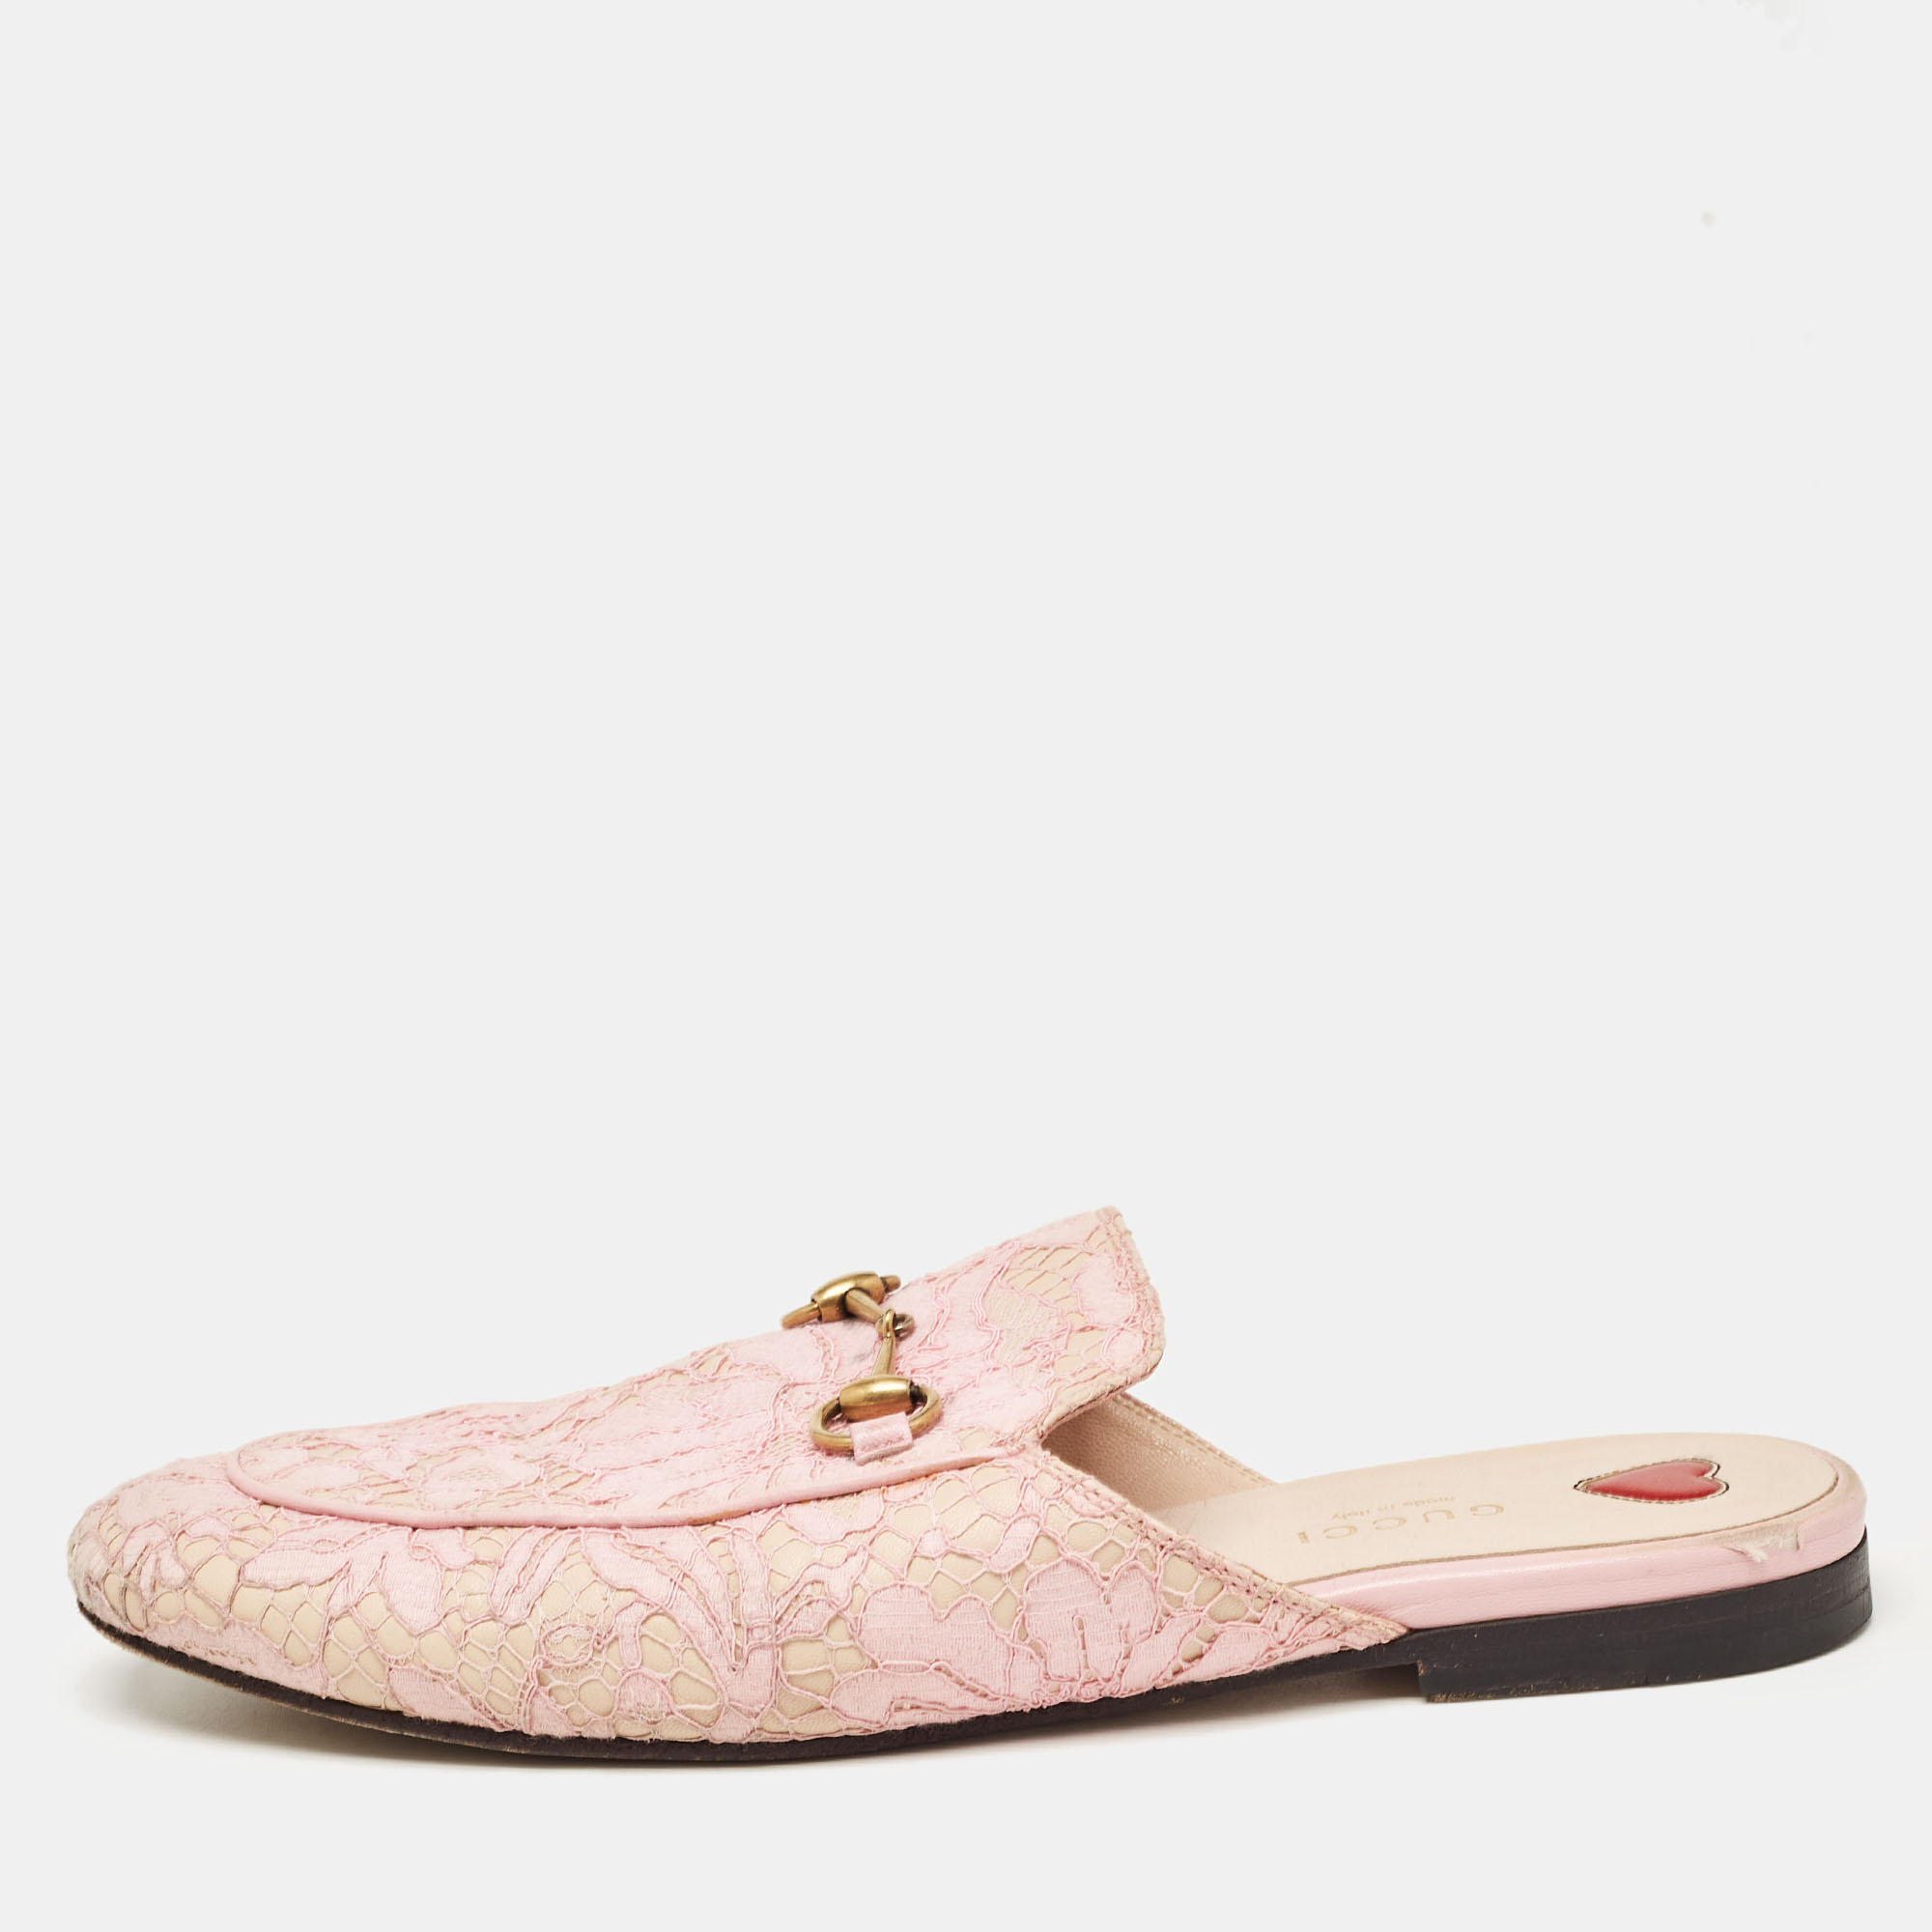 Gucci pink lace and mesh princetown mules size 38.5